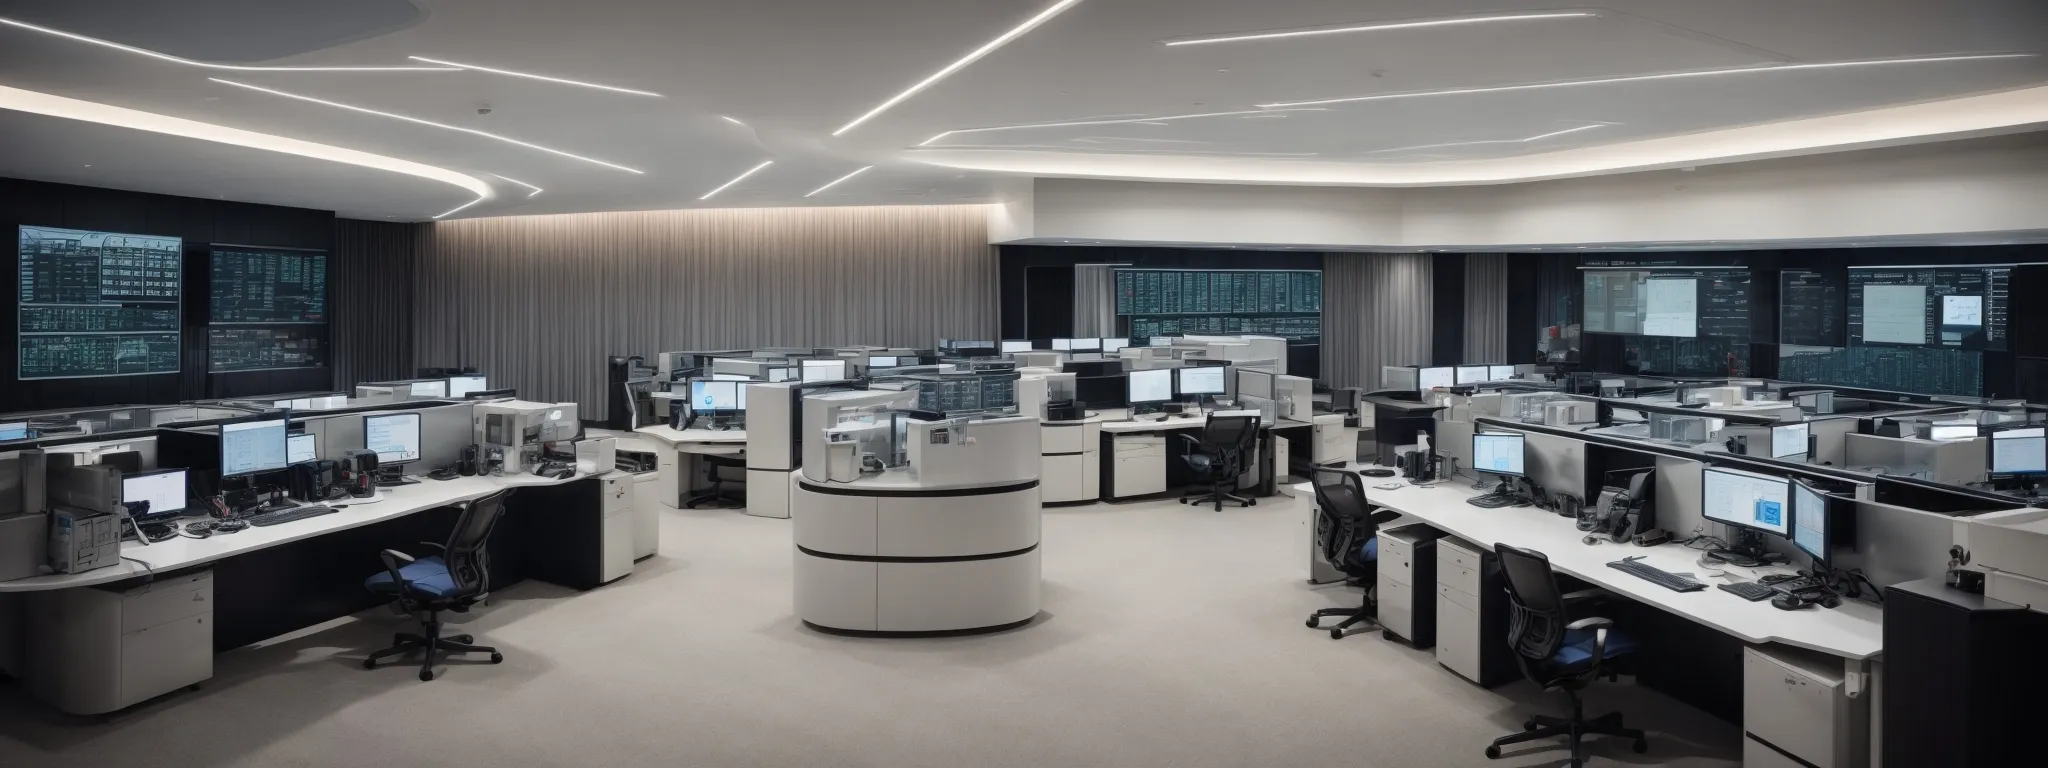 a sleek modern office with rows of computer stations indicating a high-tech control center for enterprise management.